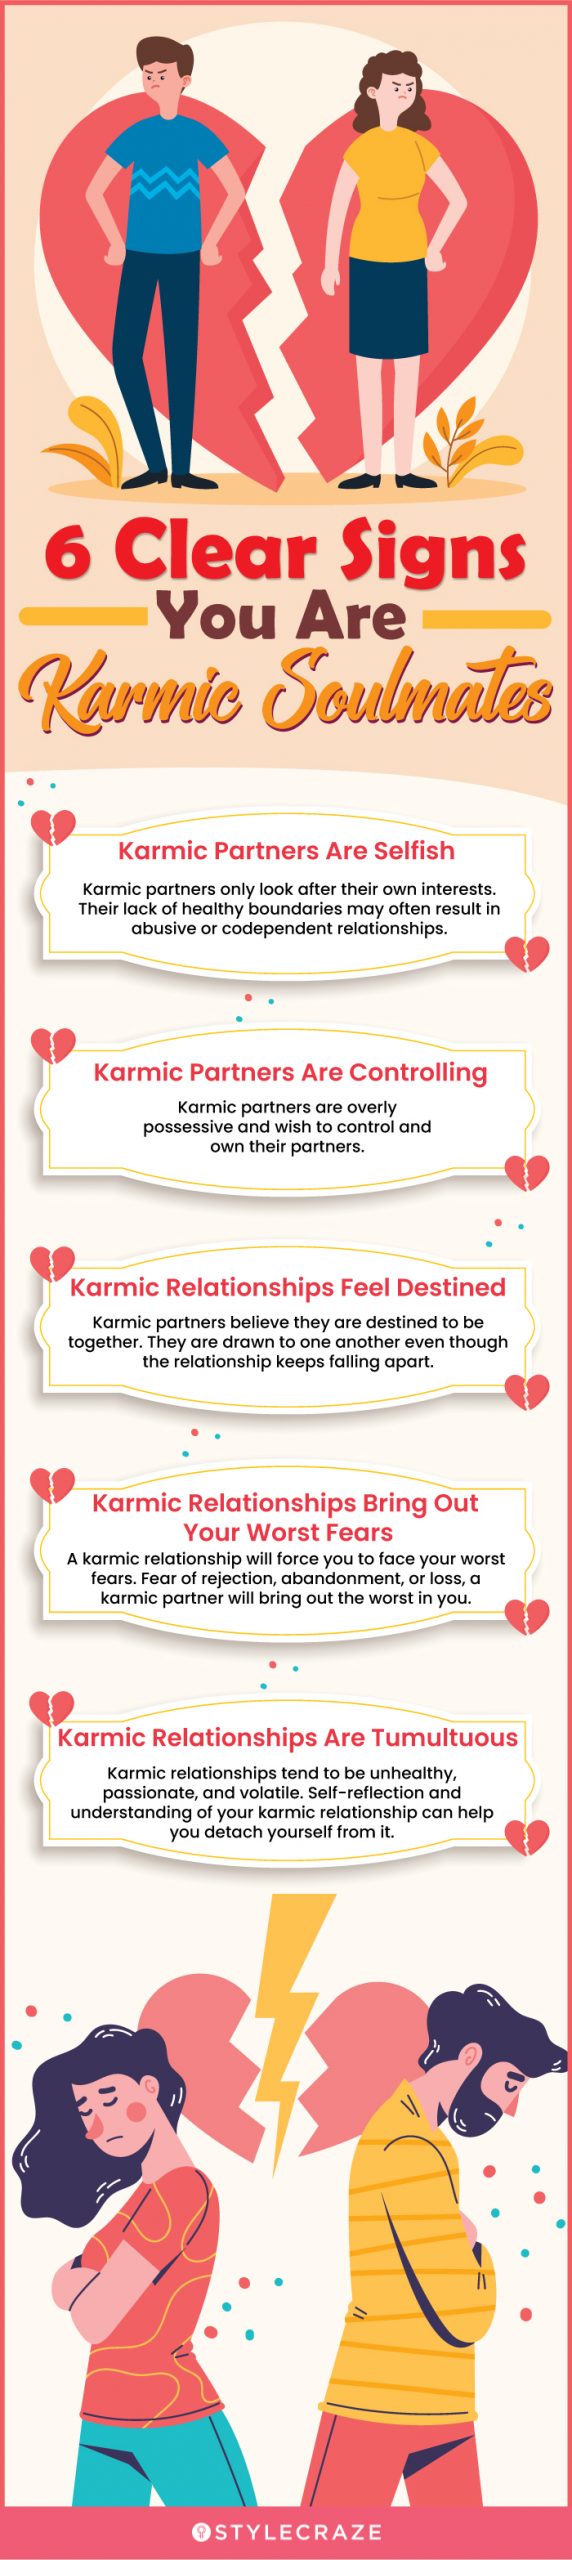 6 clear signs you are karmic soulmates (infographic)